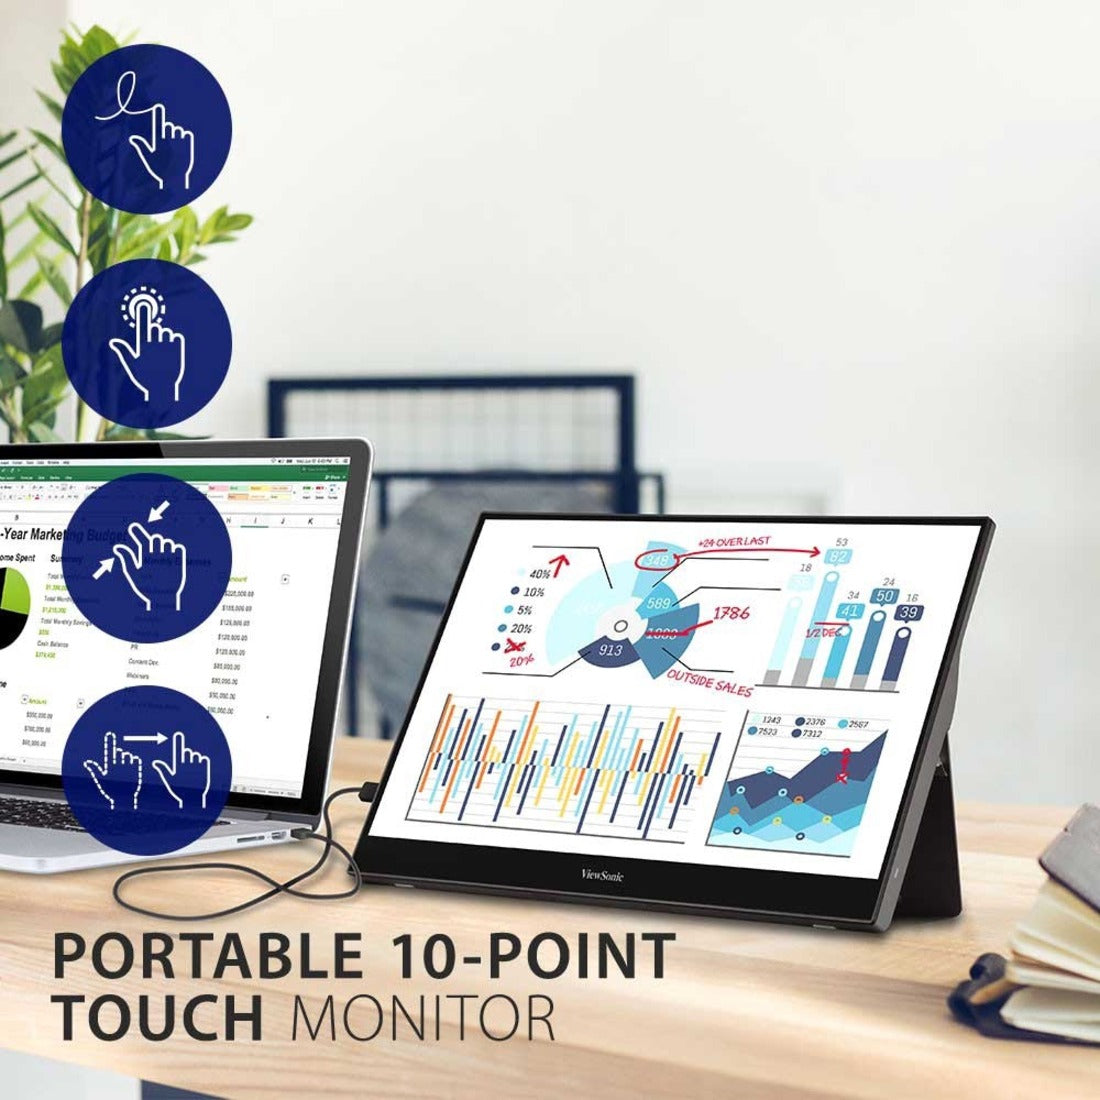 ViewSonic TD1655 Touchscreen LCD Monitor, 15.6" Portable Touch Display with FHD 1080p, 2-Way Power with USB Type-C